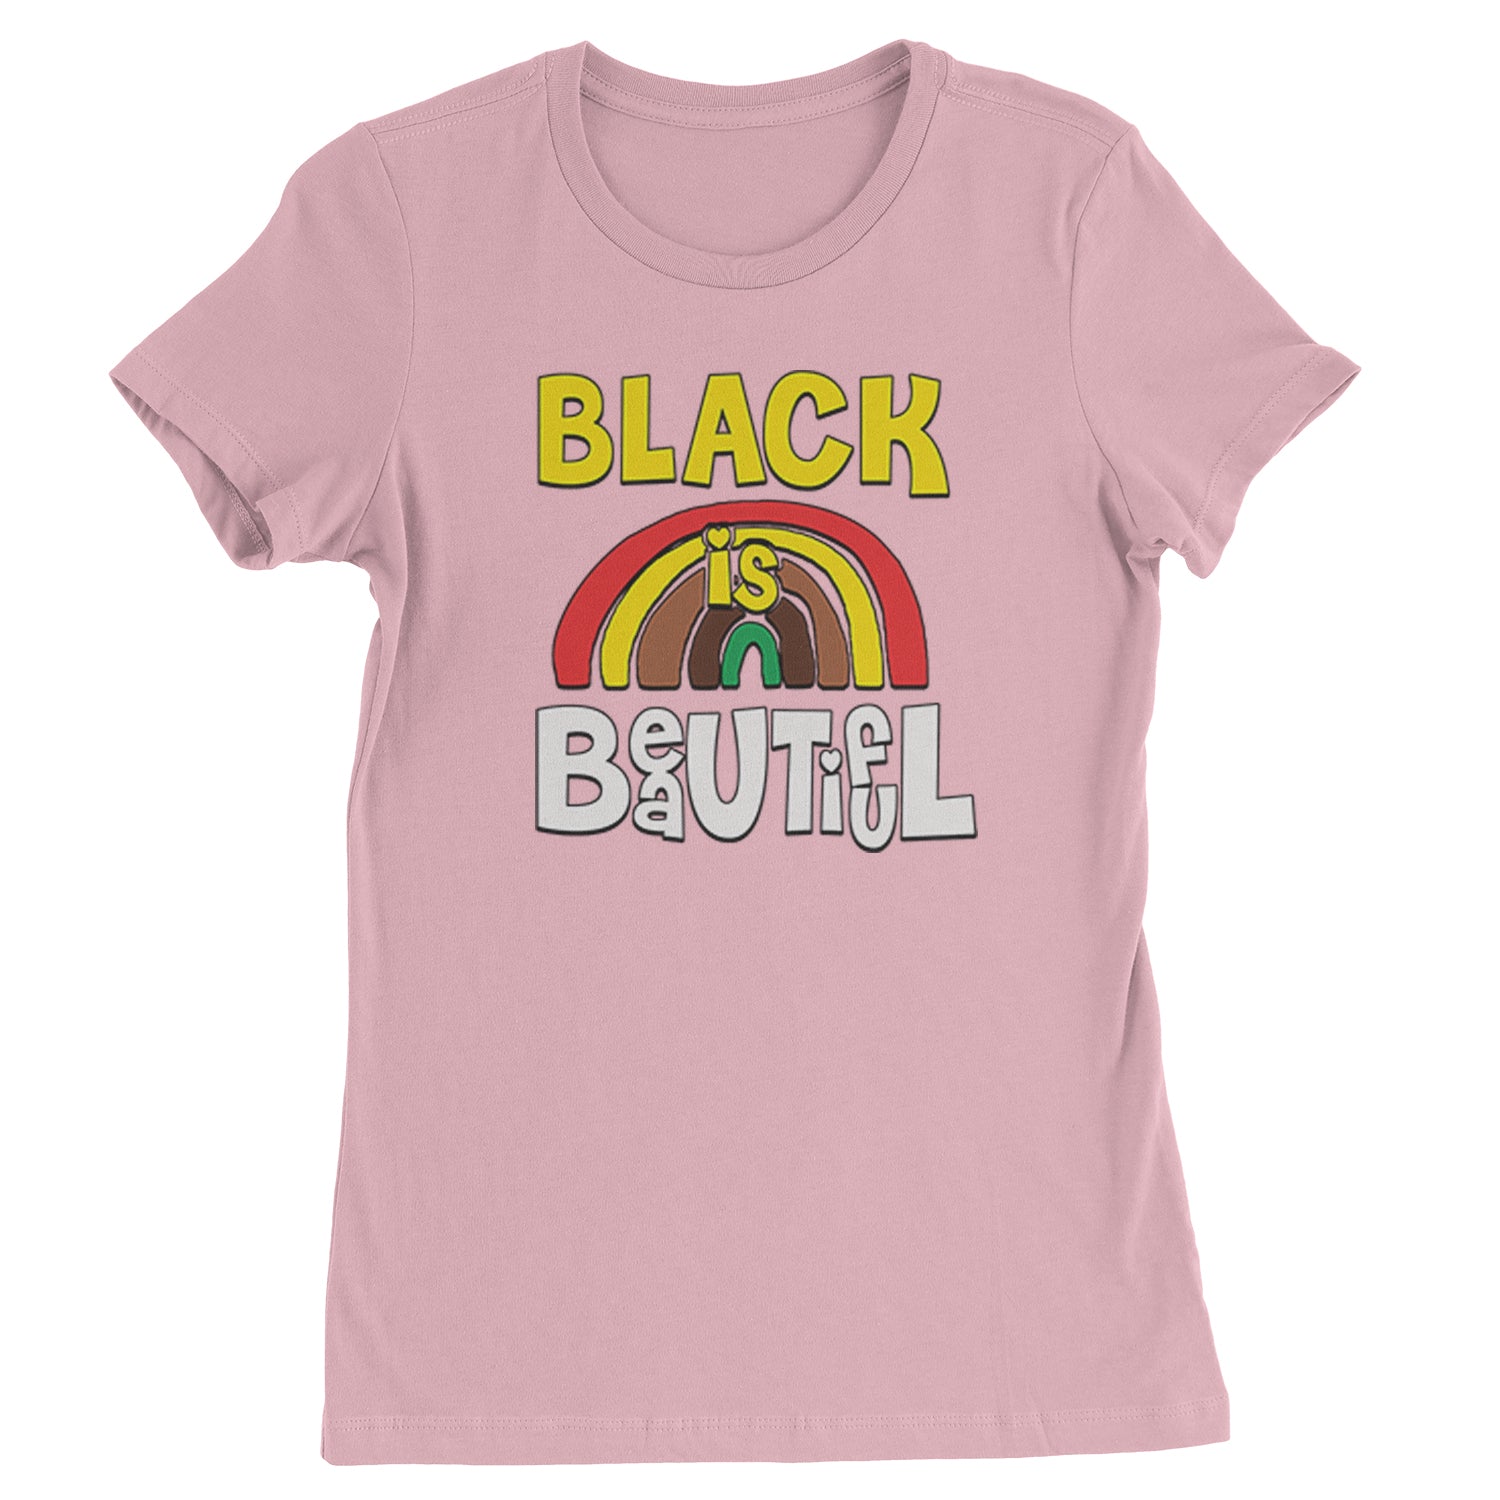 Black Is Beautiful Rainbow Womens T-shirt african, africanamerican, american, black, blackpride, blm, harriet, king, lives, luther, malcolm, march, martin, matter, parks, protest, rosa, tubman, x by Expression Tees